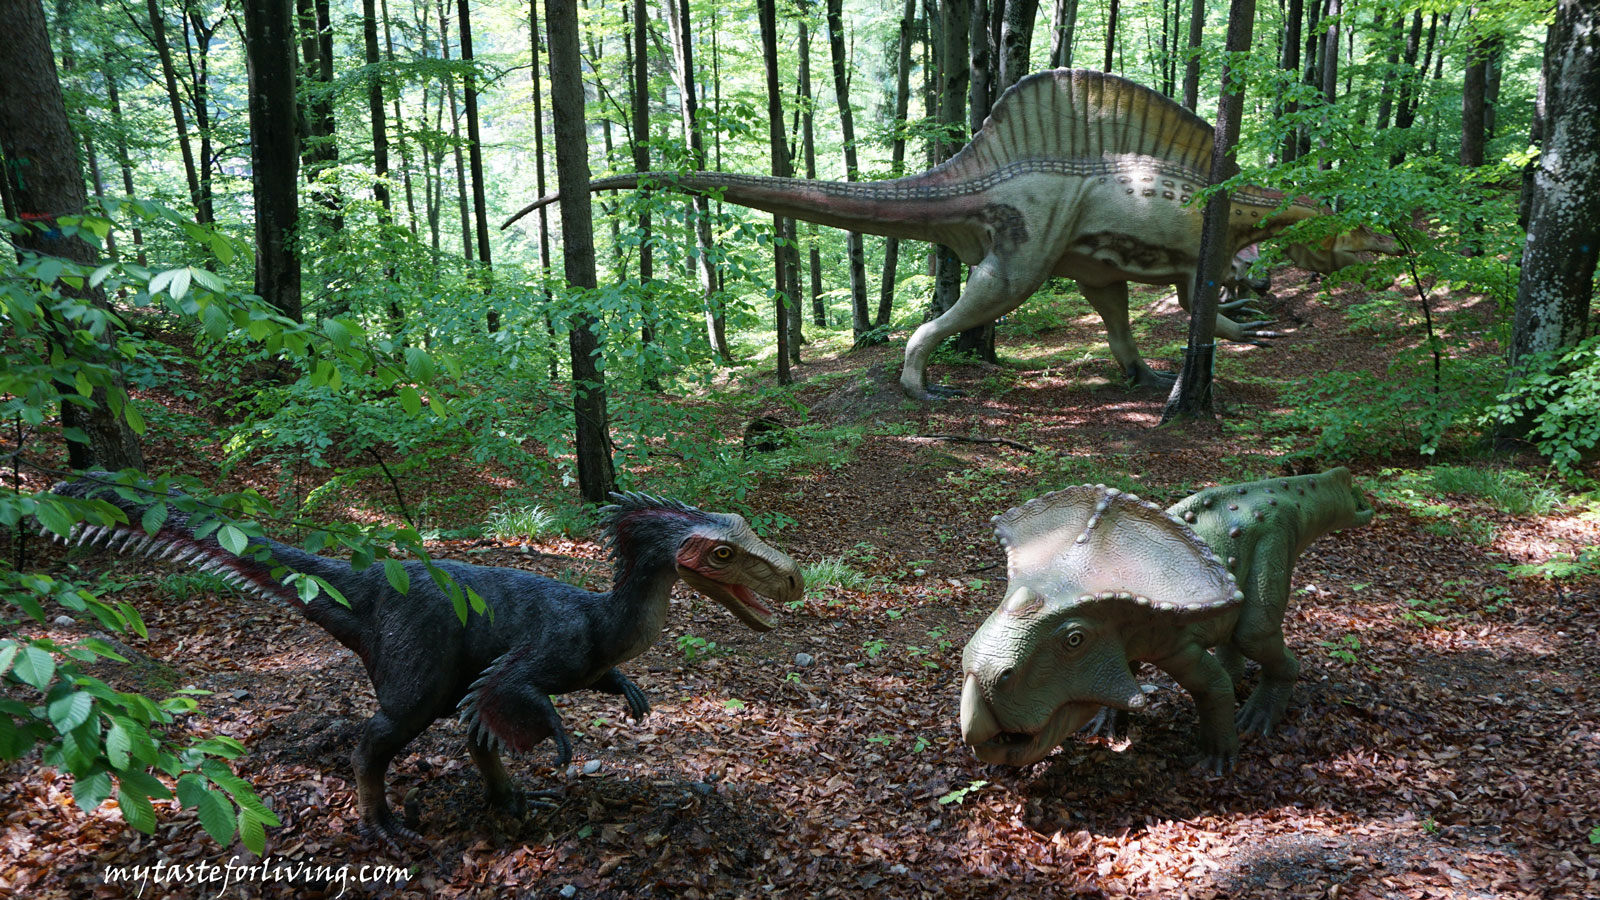 Dino Park in Rasnov, Romania is a recreation area with a museum part both indoors and outdoors, and is the largest park in southeastern Europe.